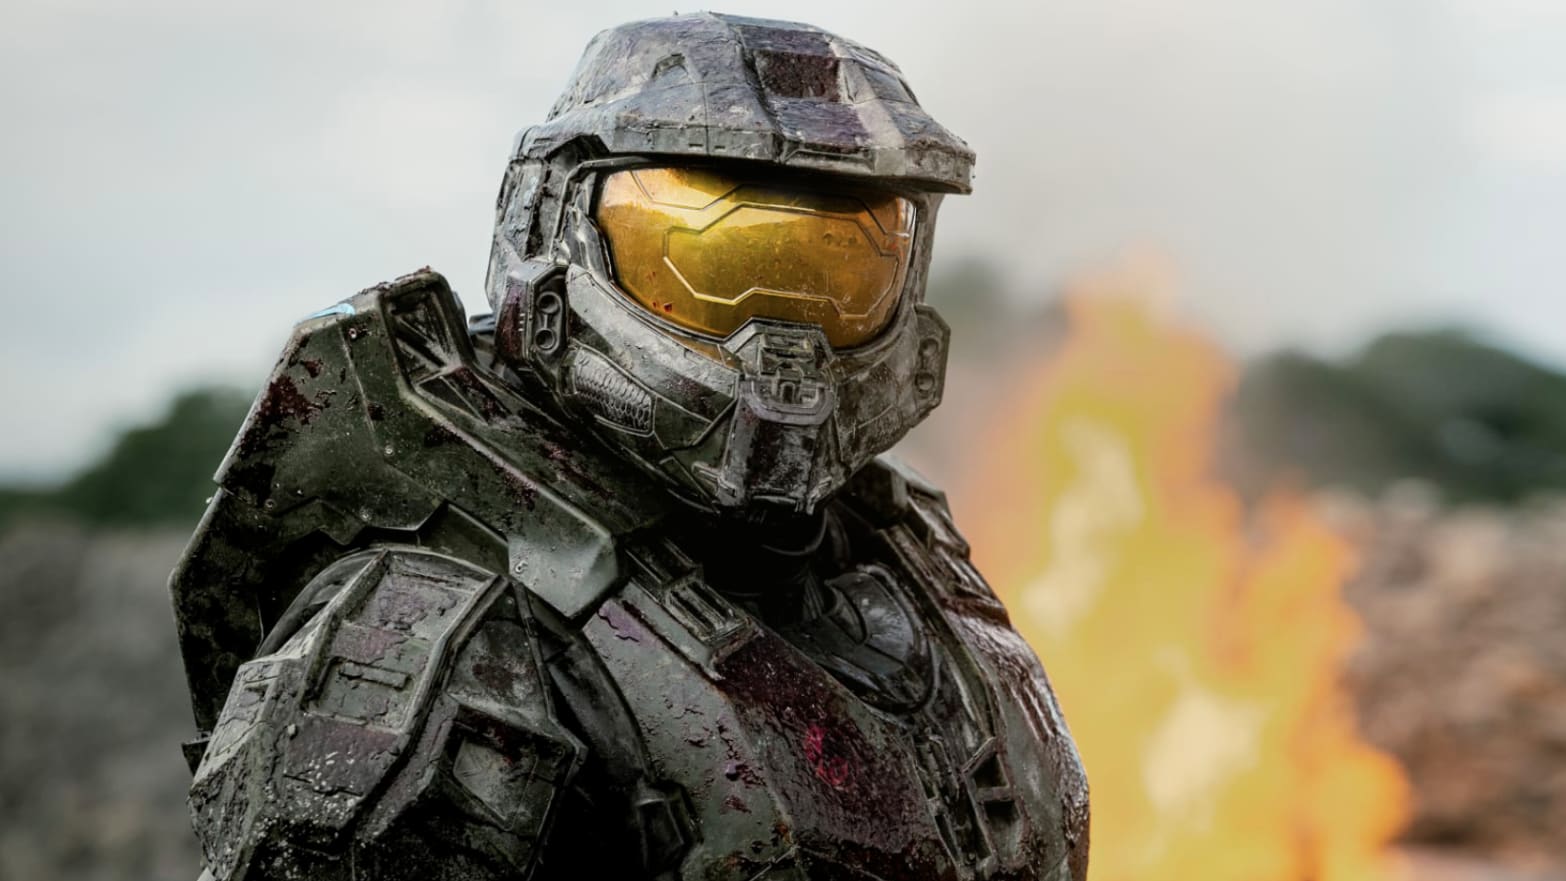 You can now watch Paramount Plus' live-action Halo TV show for free on